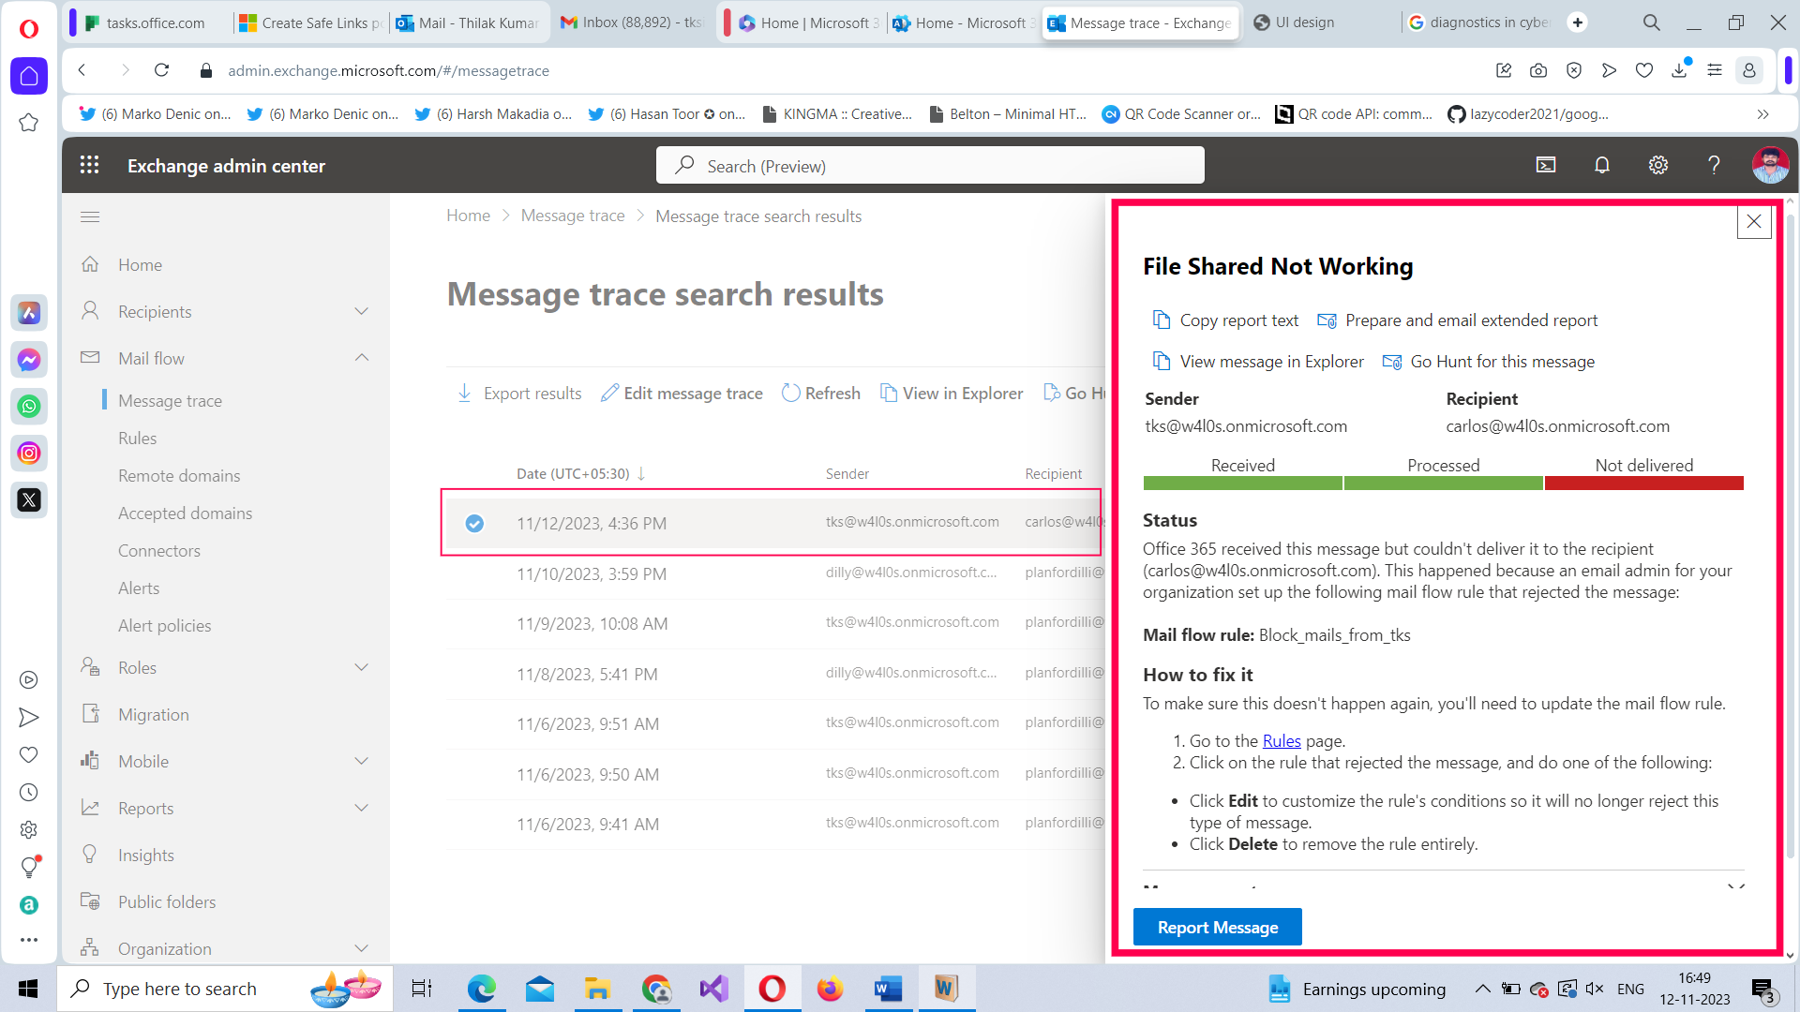 This screenshot shows details about failed messages including status, mail flow rules, and how to fix it.